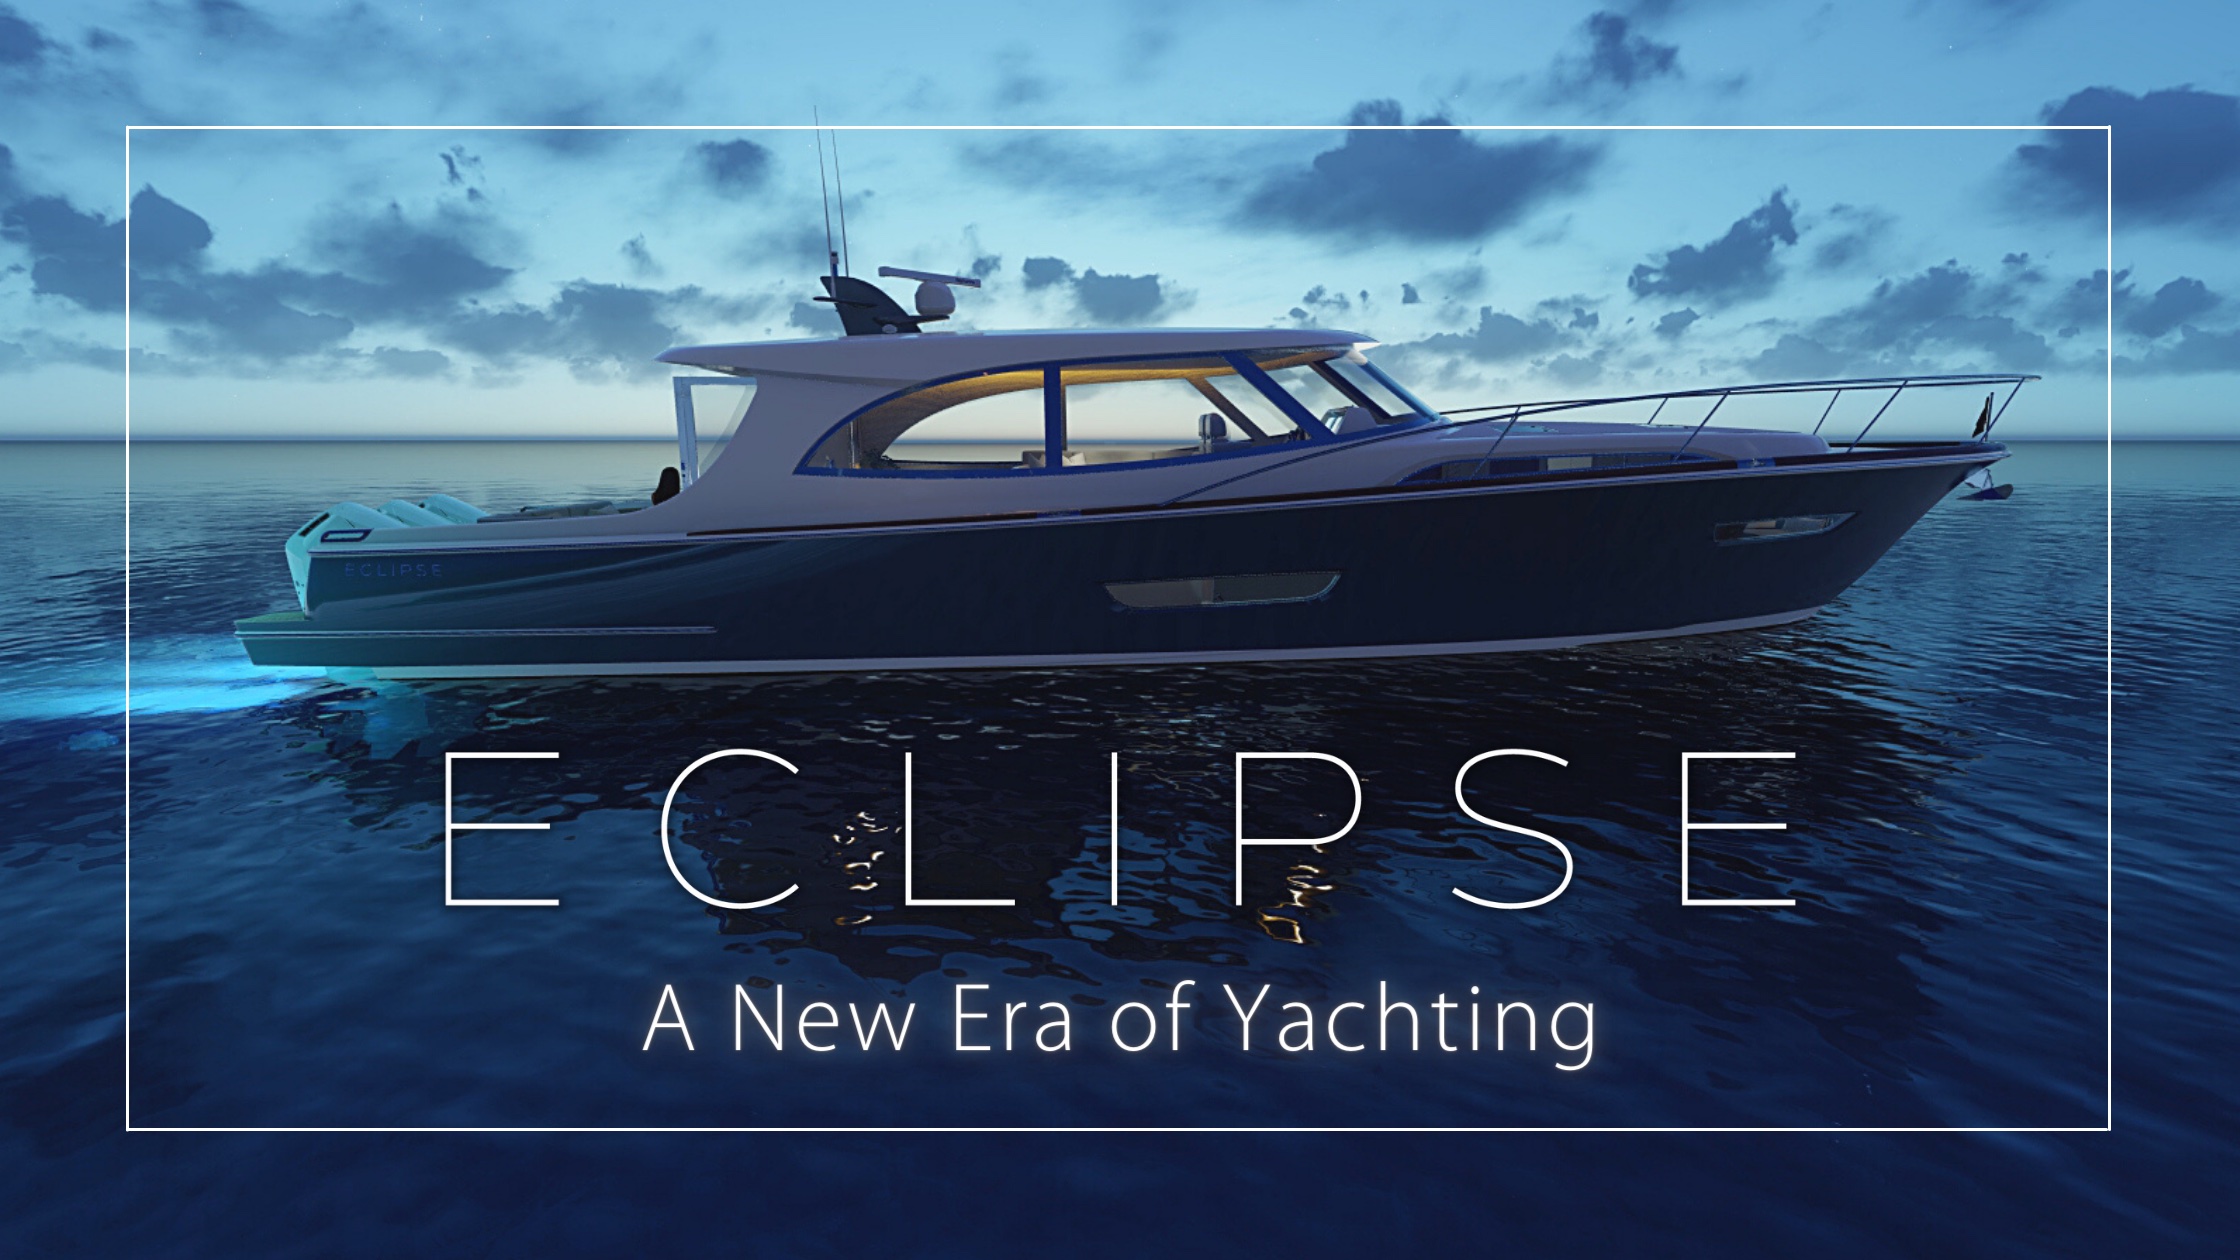 A New Era of Yachting: ECLIPSE is One to Watch